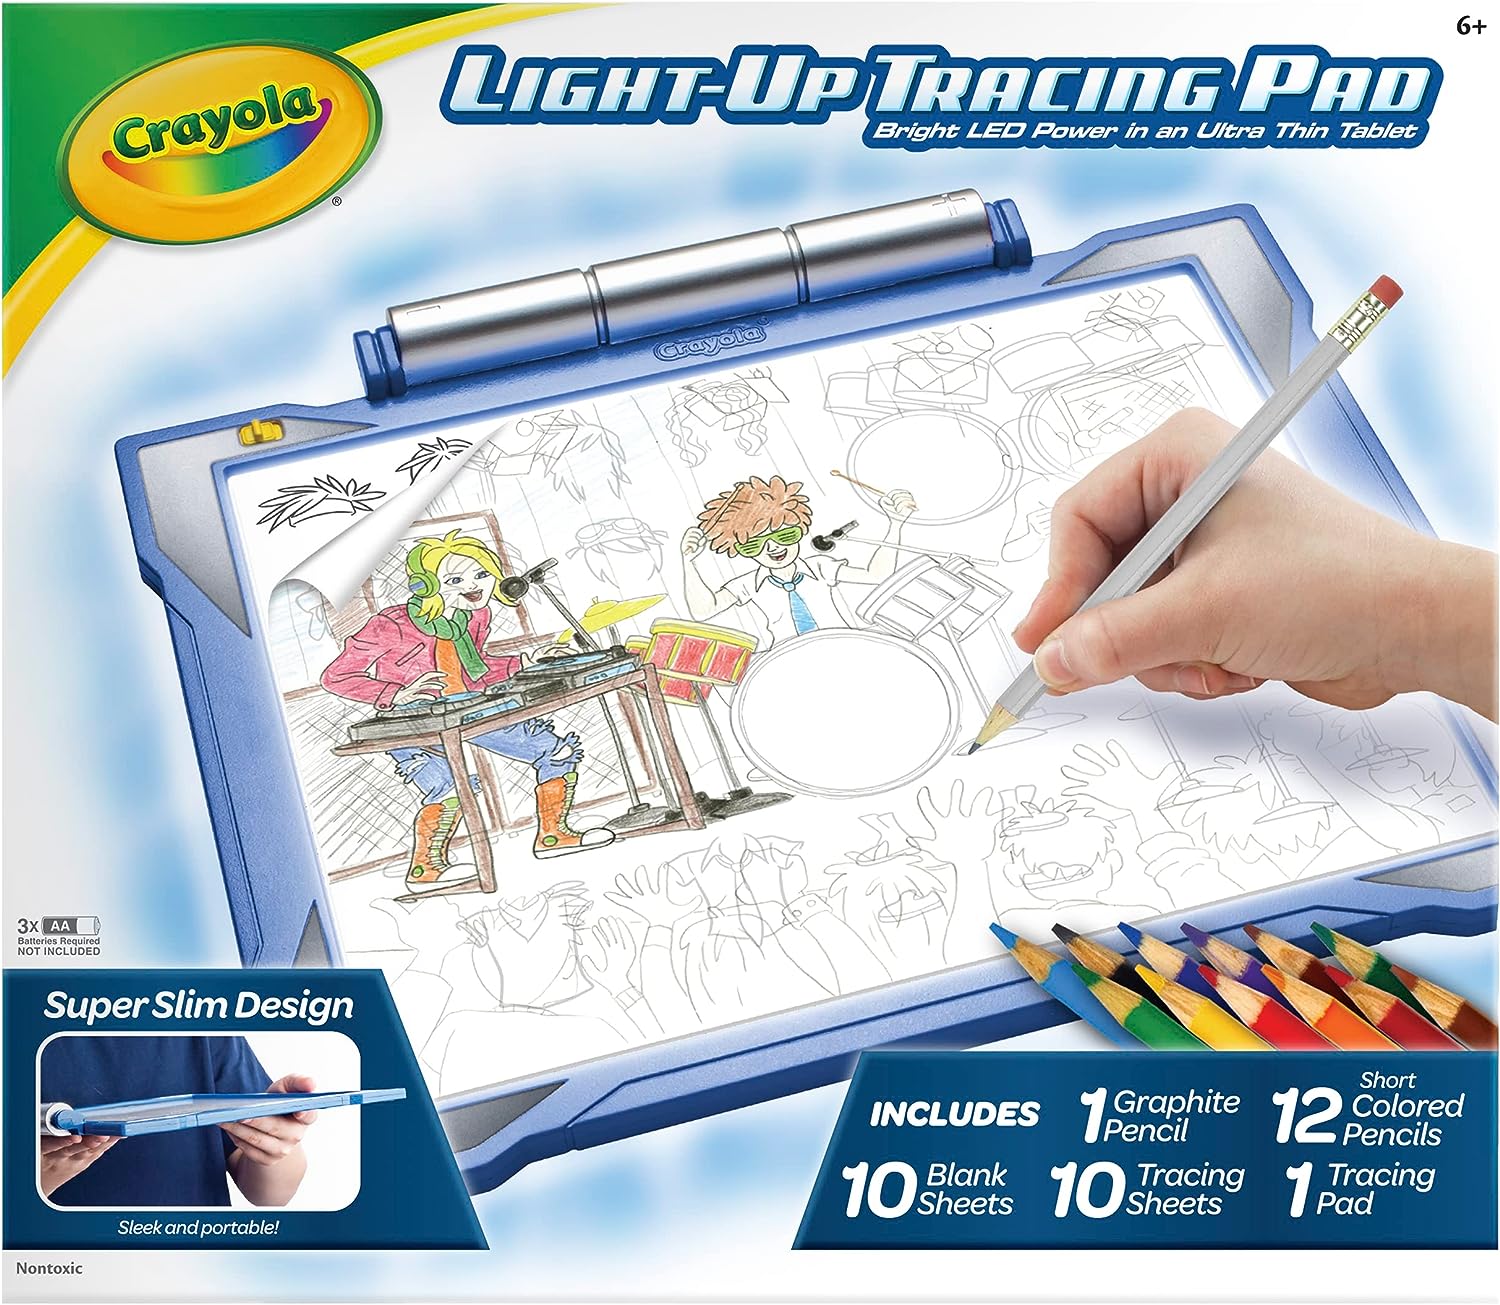 Crayola Light Up Tracing Pad - Blue, Tracing Light Box for Kids, Drawing Pad, Holiday Toys, Gifts for Boys and Girls, Ages 6+